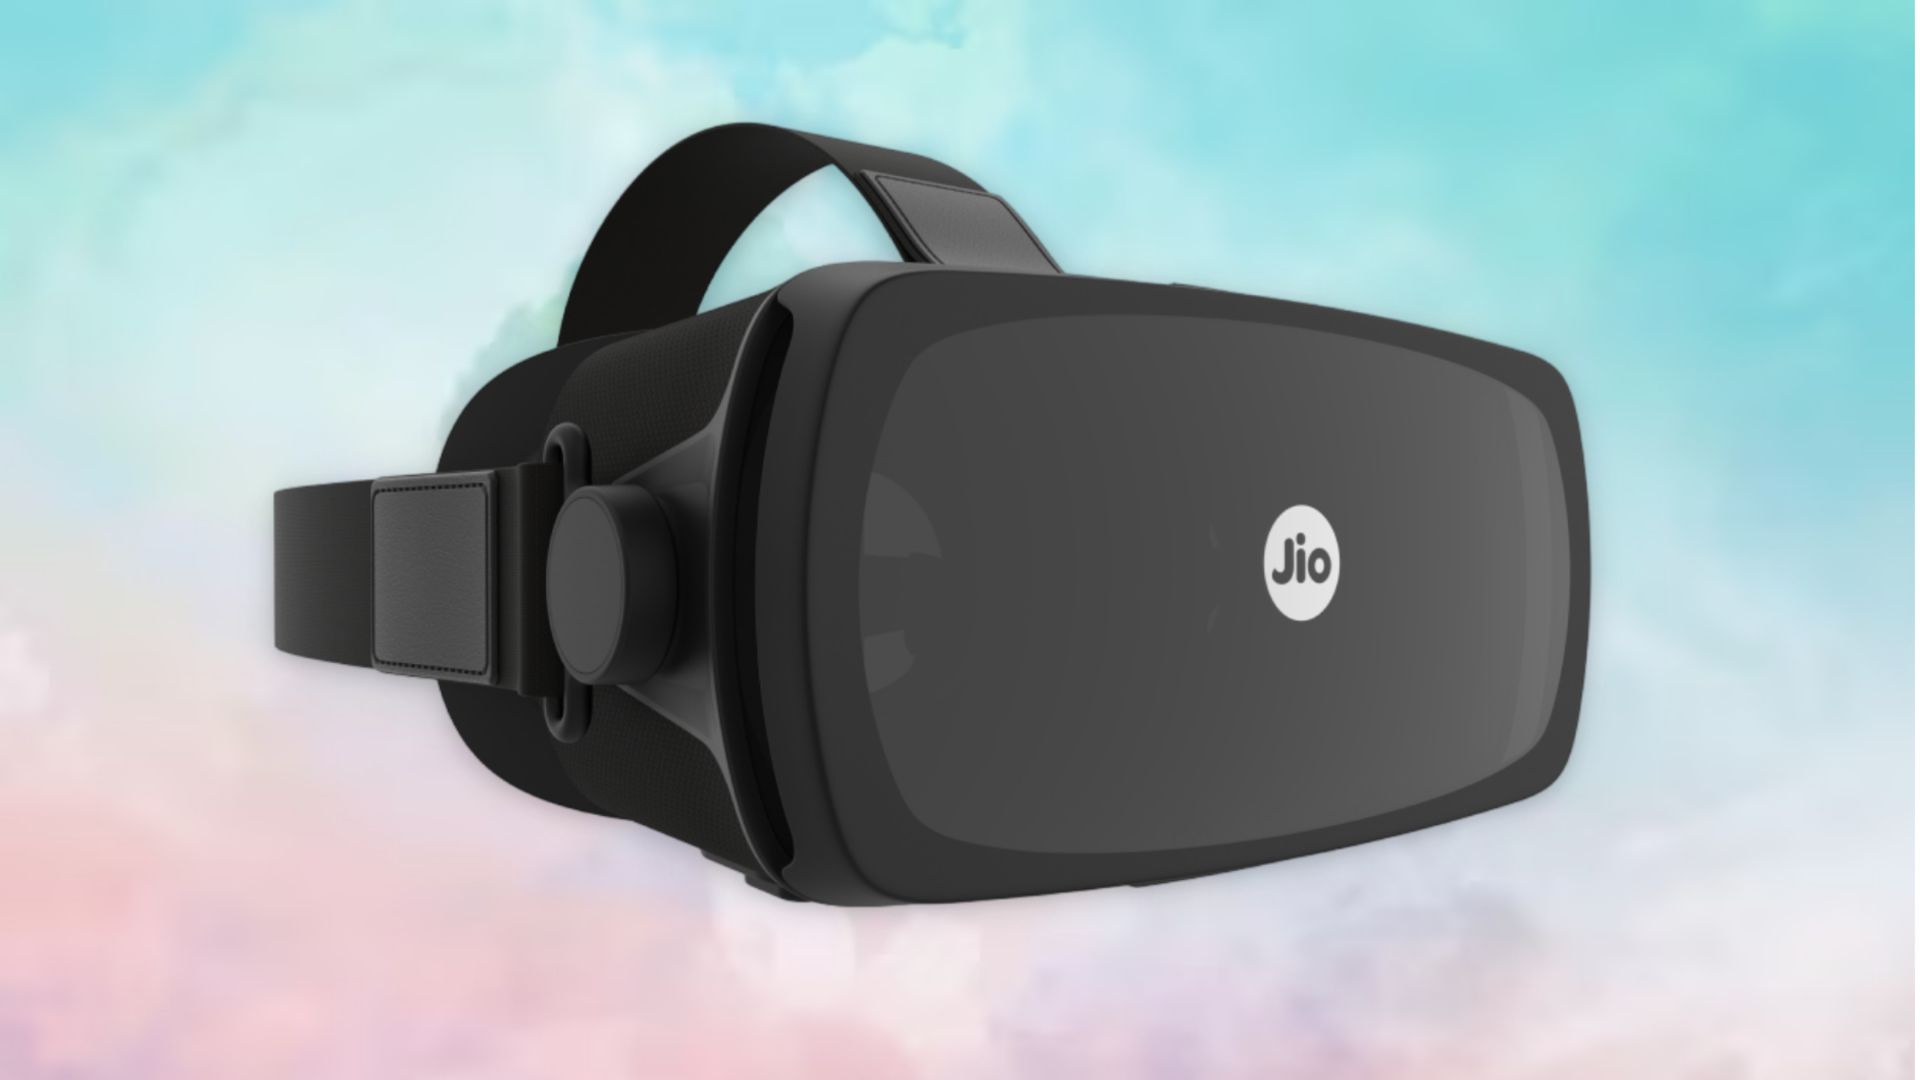 Meet JioDive, affordable headset to watch IPL matches in VR